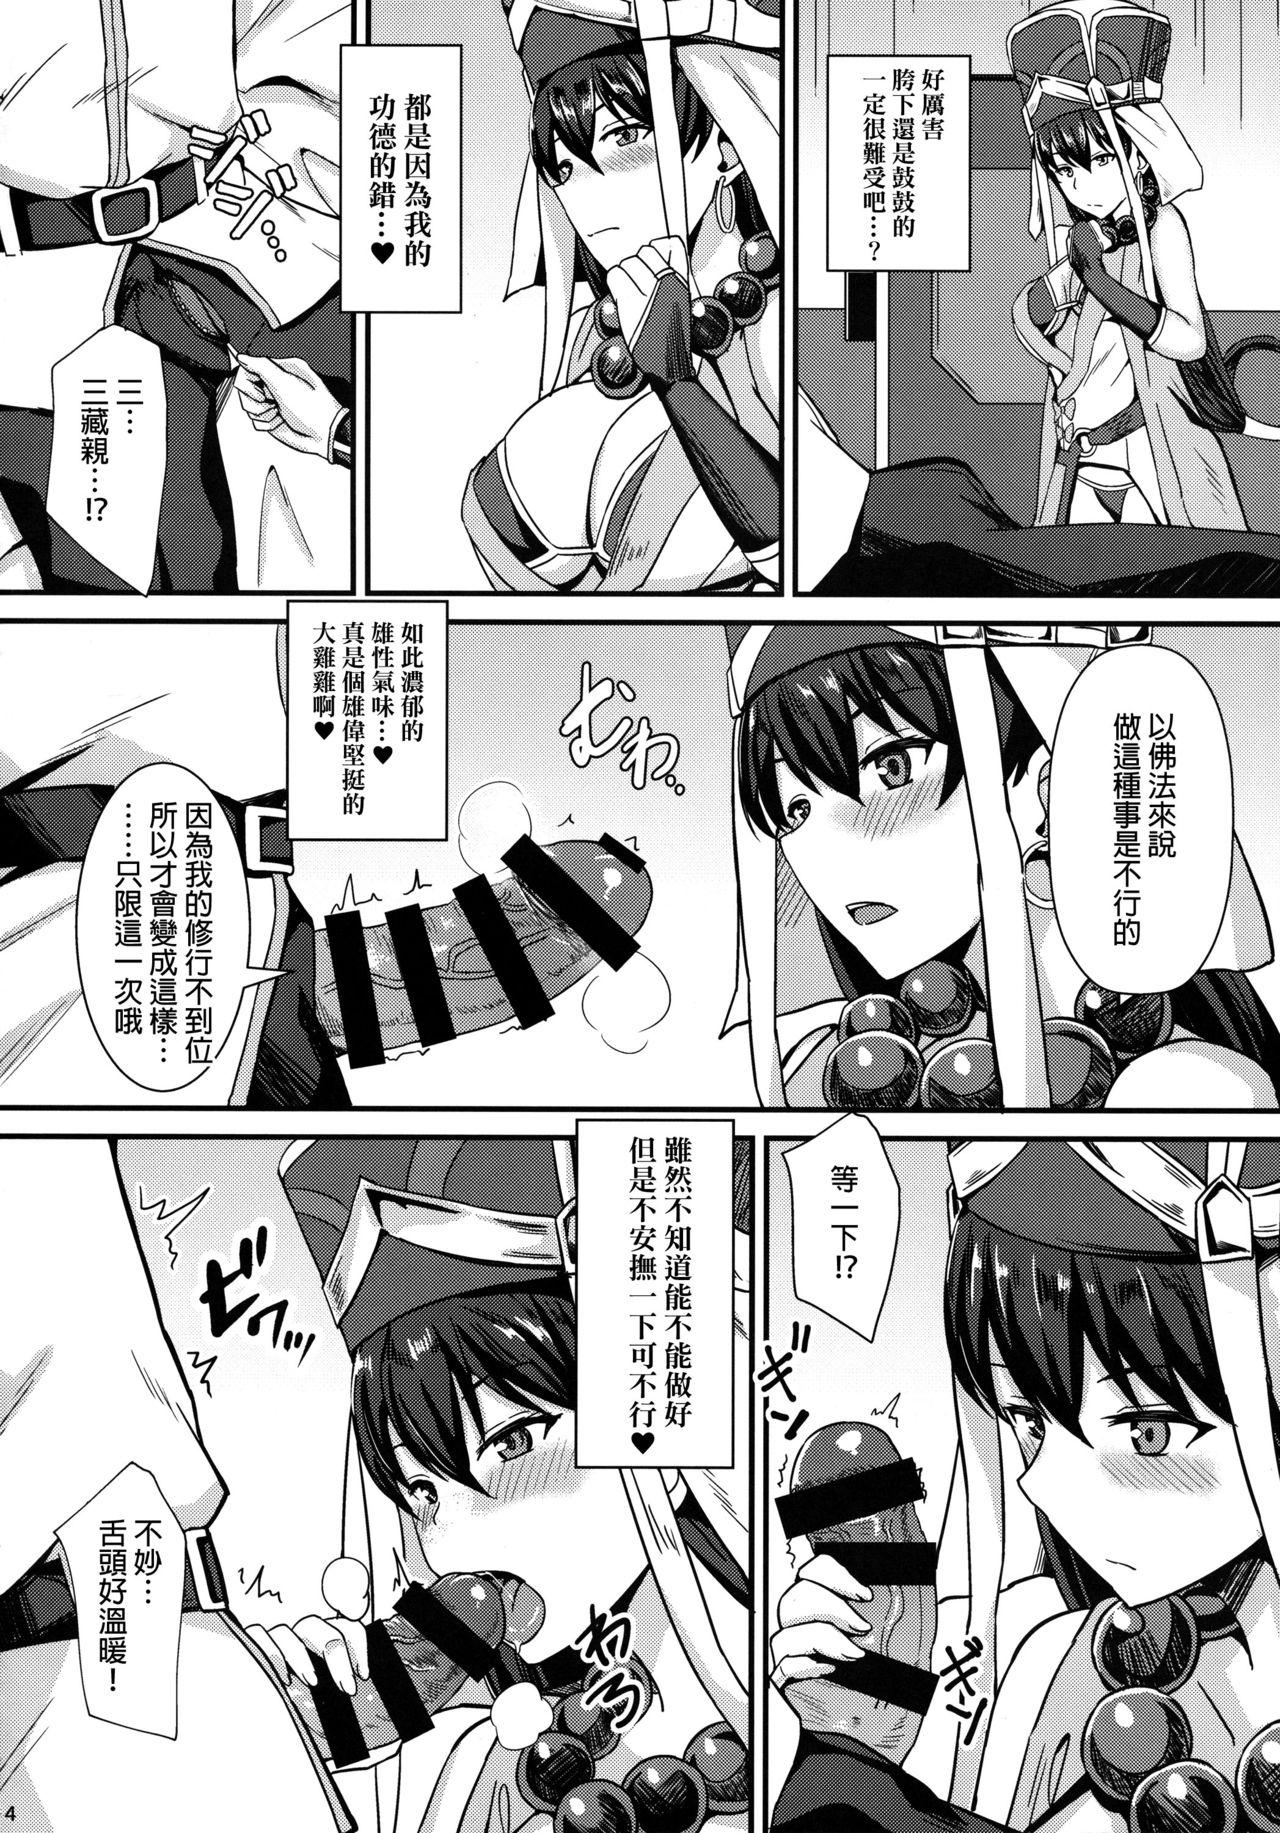 Sperm Burning Halo - Fate grand order Lesbians - Page 5